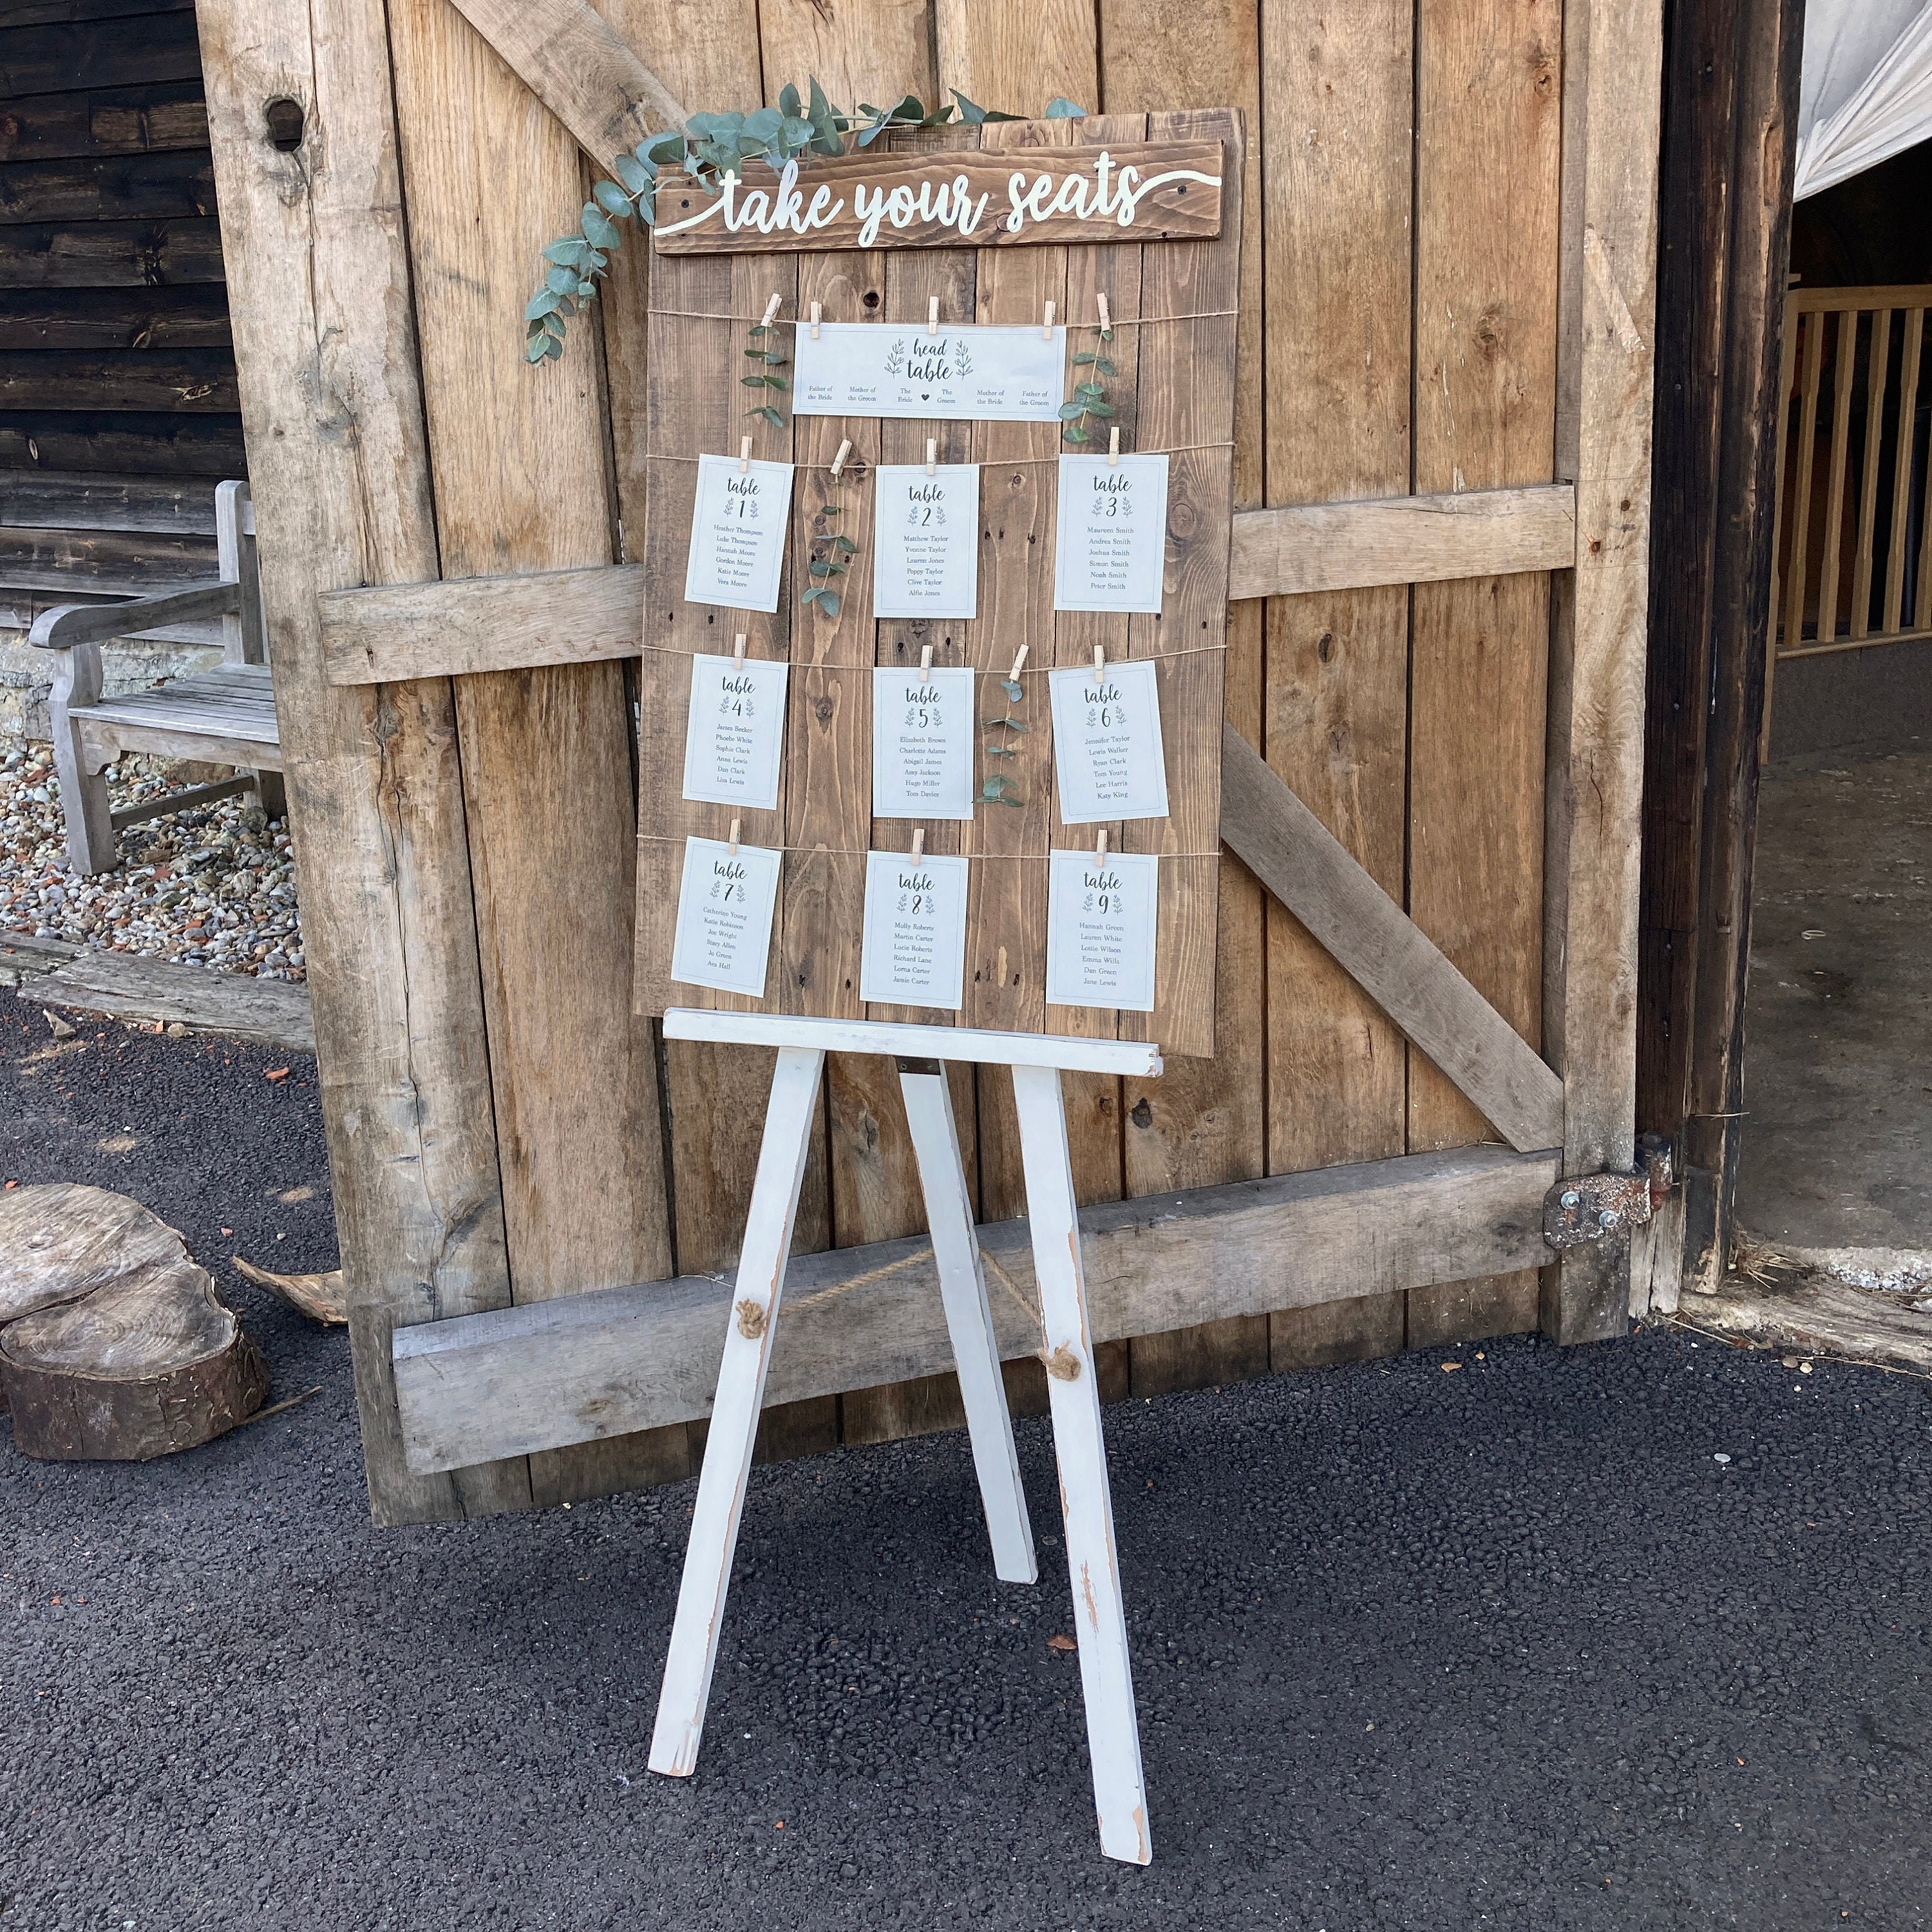 Jackson's : Book Stand Table Easel